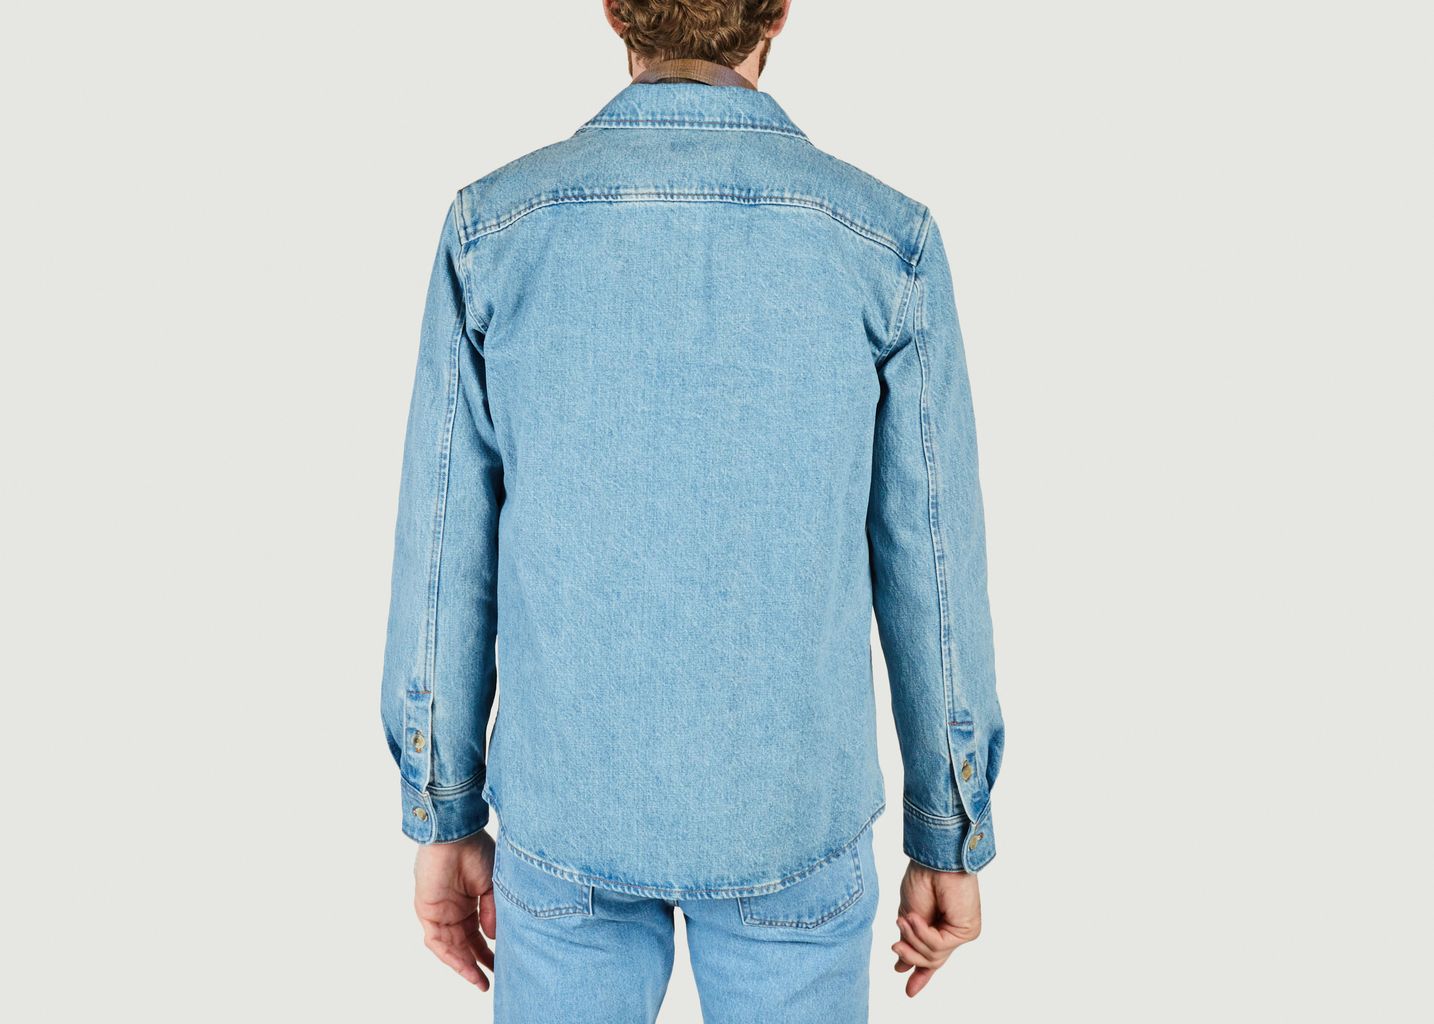 Vittorio Embroidered Chest Overshirt - A.P.C.